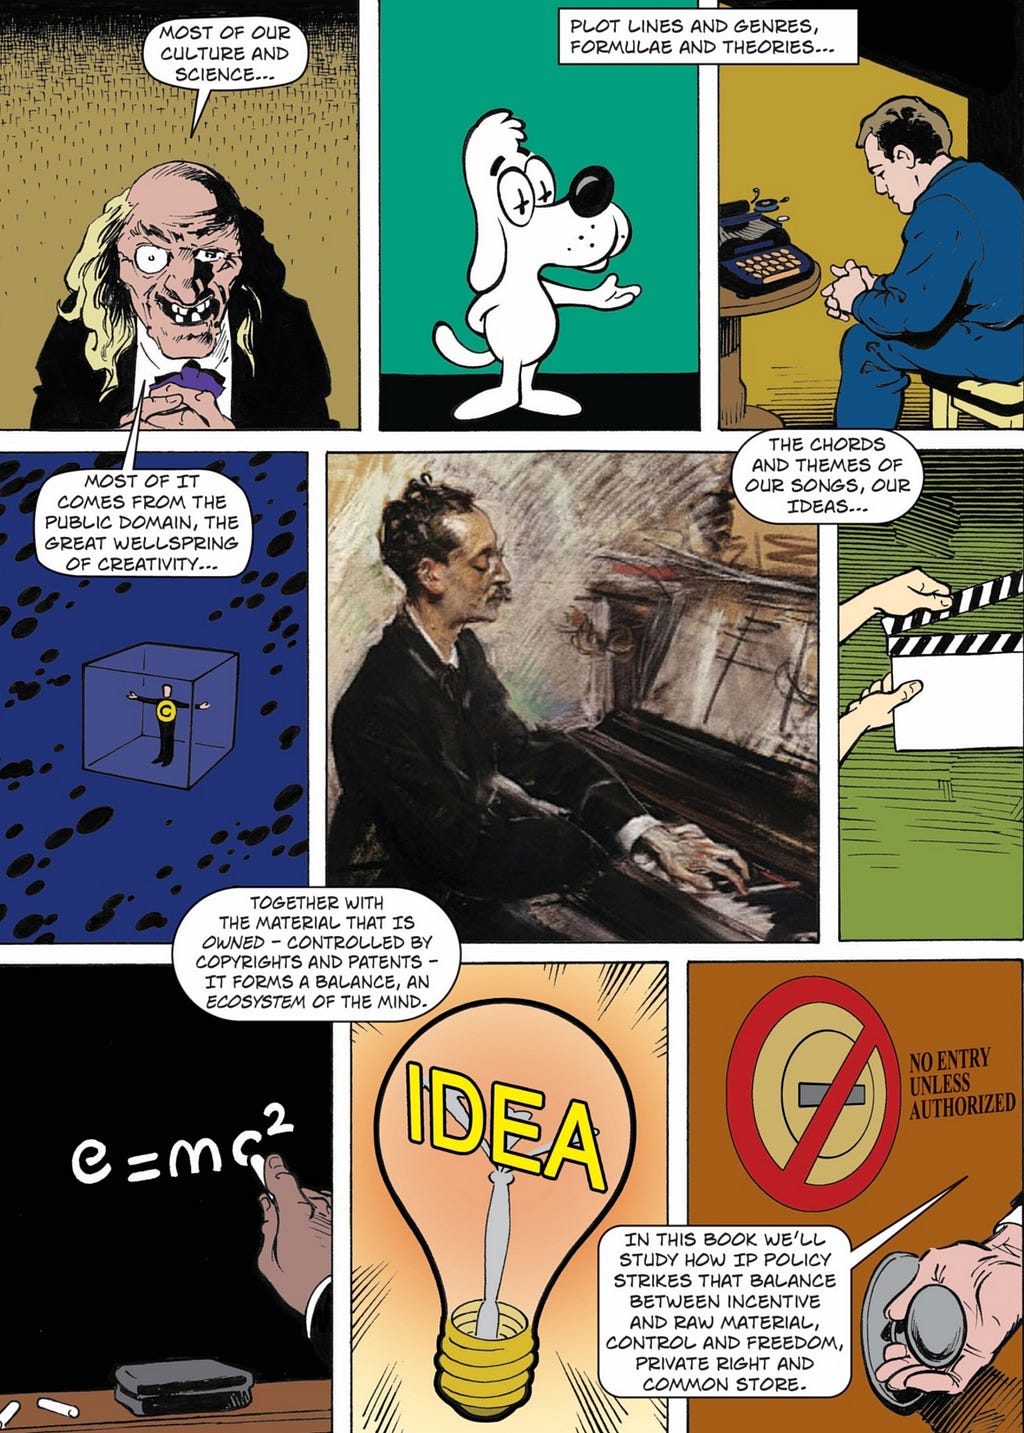 A series of comic-book panels symbolizing ‘ideas,’ including Mr Peabody, ‘e-mc2,’ a lightbulb and more. Image: Jenkins and Boyle https://web.law.duke.edu/musiccomic/ CC BY-NC-SA 4.0 https://creativecommons.org/licenses/by-nc-sa/4.0/